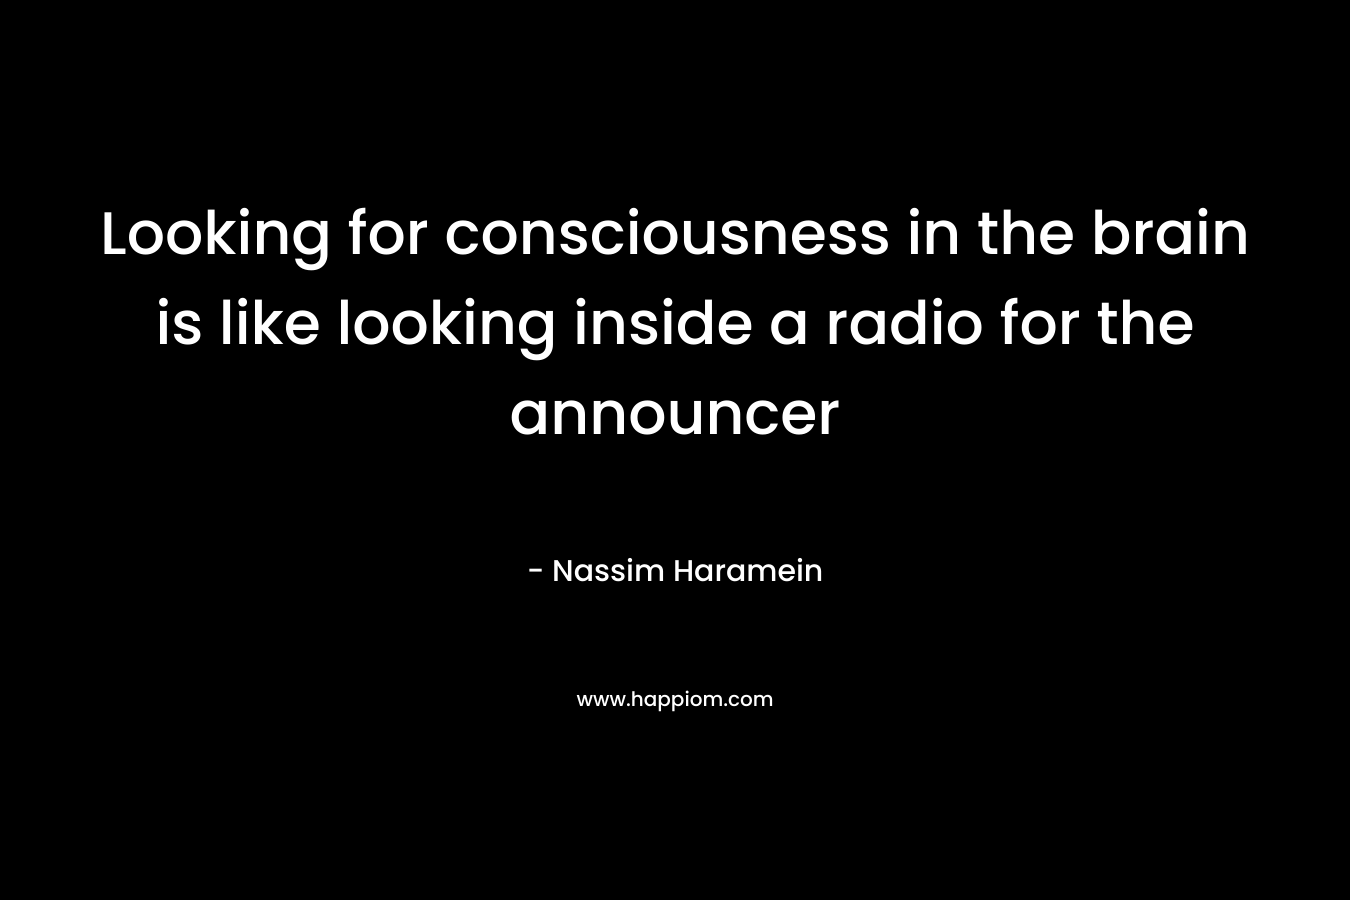 Looking for consciousness in the brain is like looking inside a radio for the announcer